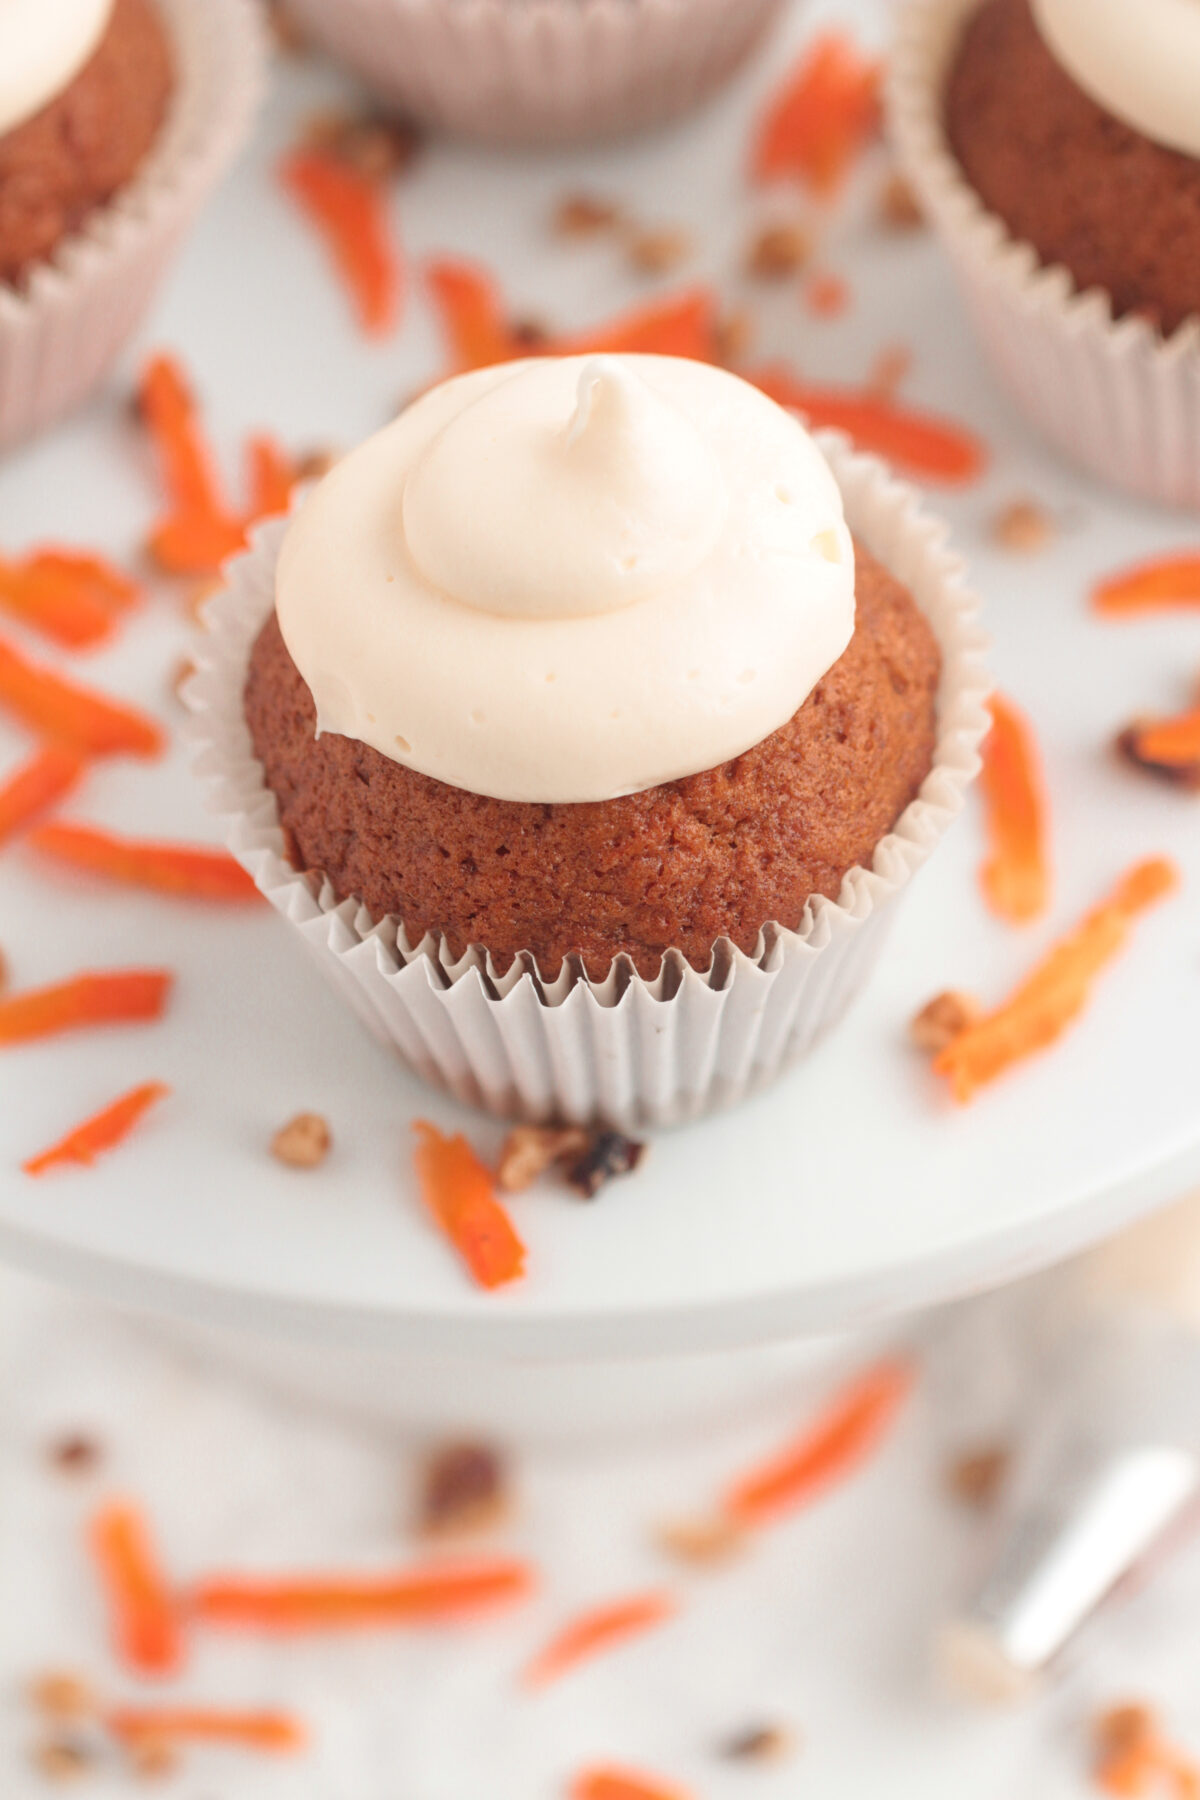 Bake up the perfect treat with this easy recipe for moist and fluffy carrot cupcakes with cream cheese frosting; ideal for any occasion.